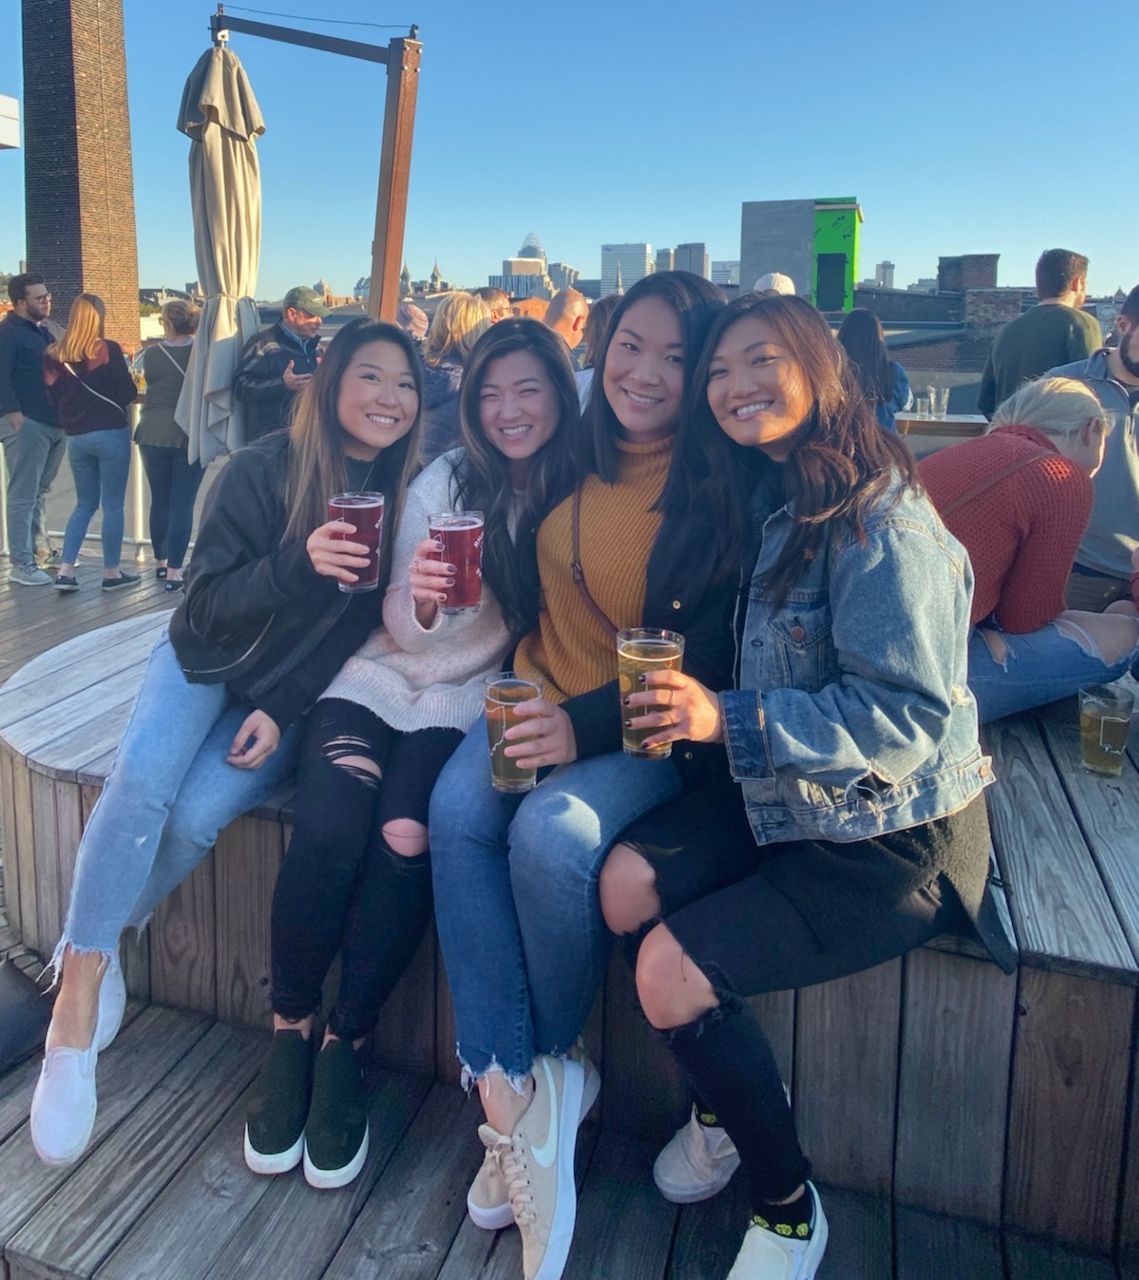 Jenna Weber and friends on a rooftop bar in downtown Cincinnati. (Photo courtesy of Jenna Weber)